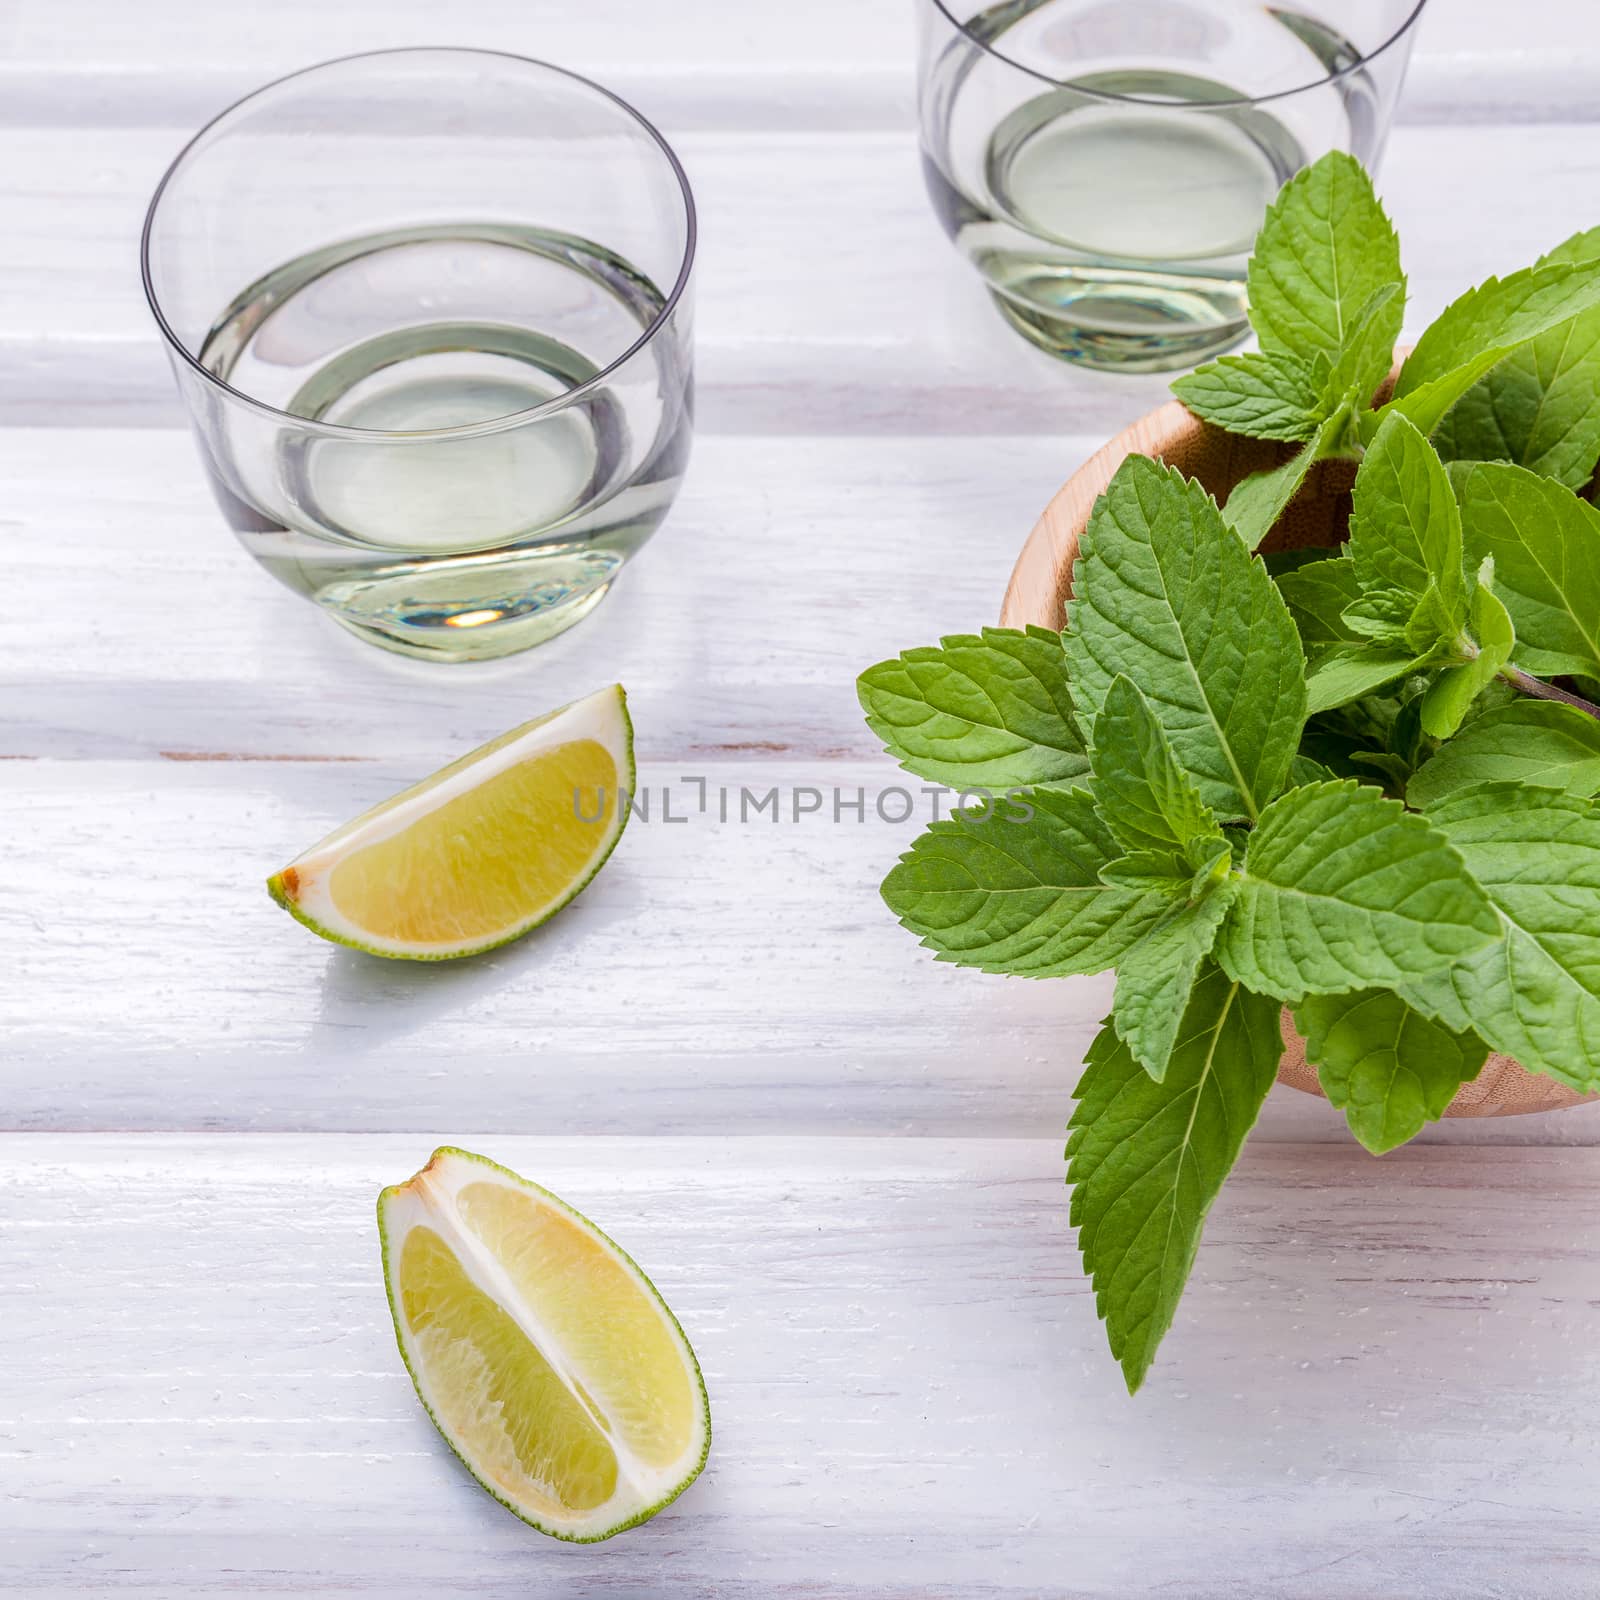 Ingredients for making mojitos mint leaves, lime,lemon and vodka by kerdkanno